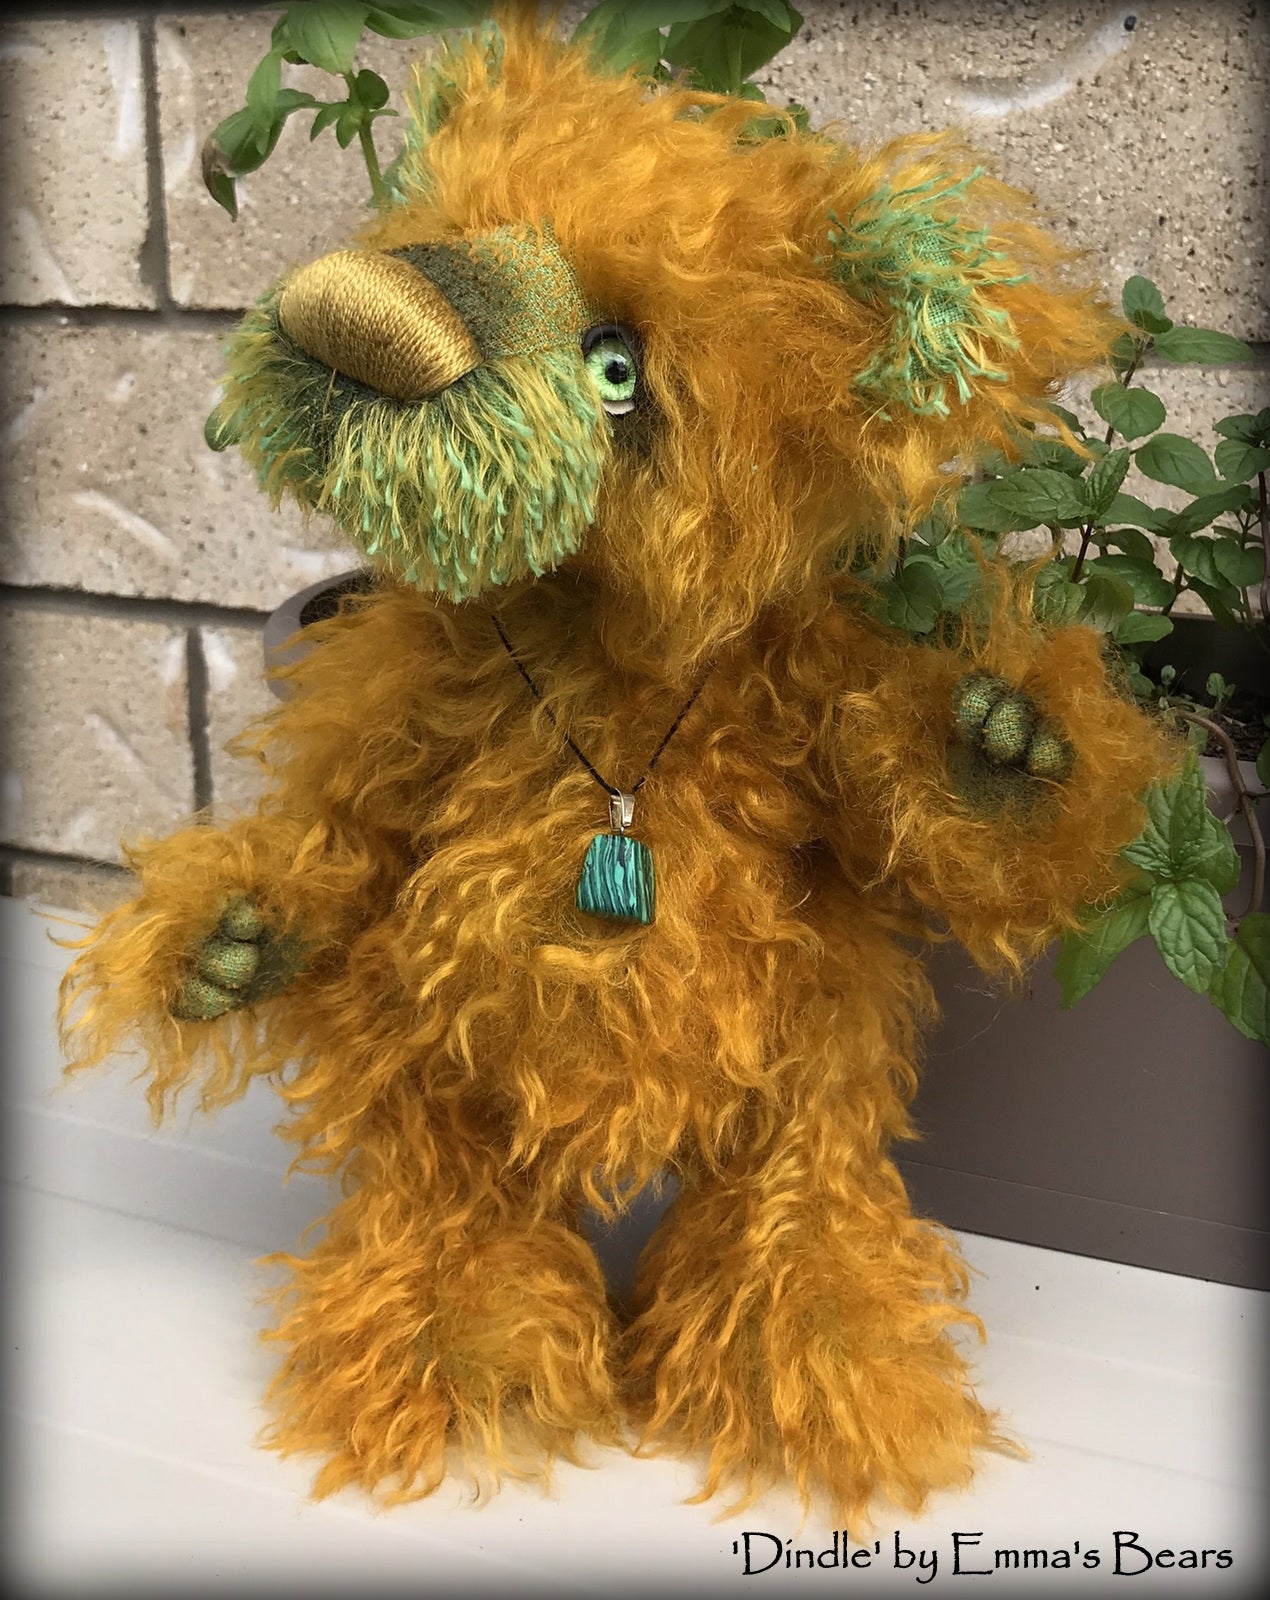 Dindle - 11" Hand Dyed Mohair Artist Bear by Emma's Bears - OOAK